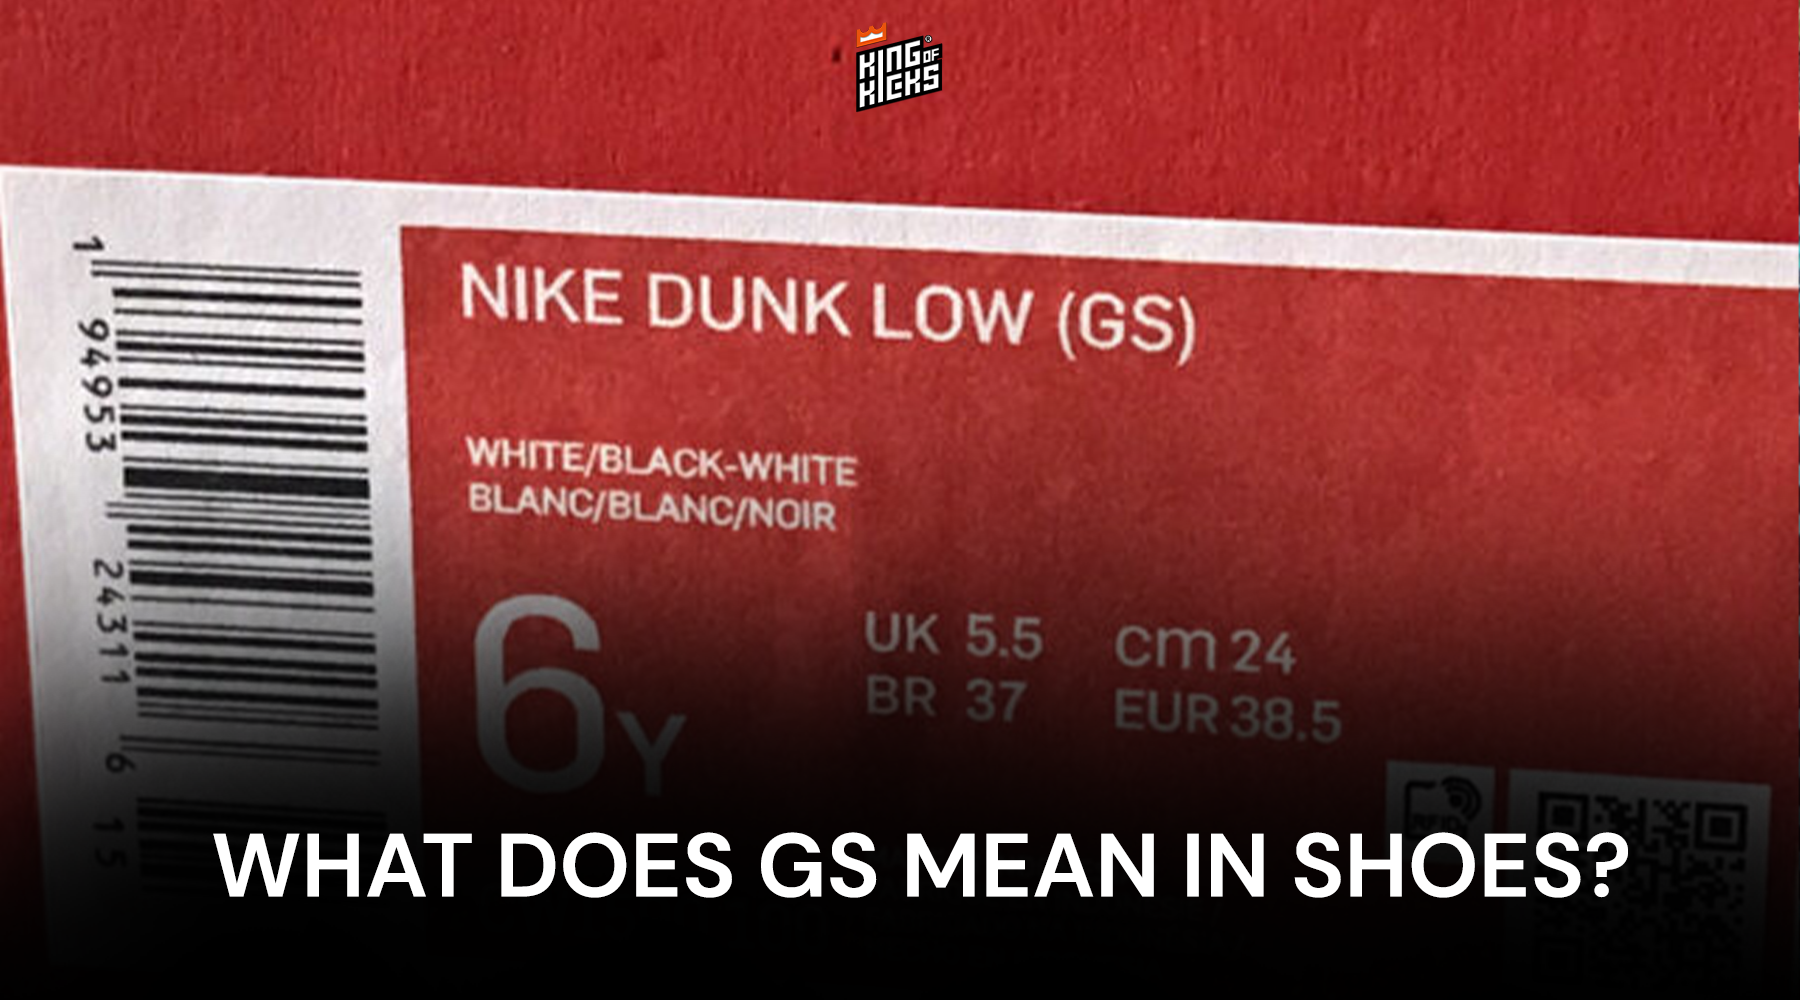 Taknemmelig saltet boom What Does GS Mean in Shoes? | King Of Kicks UK